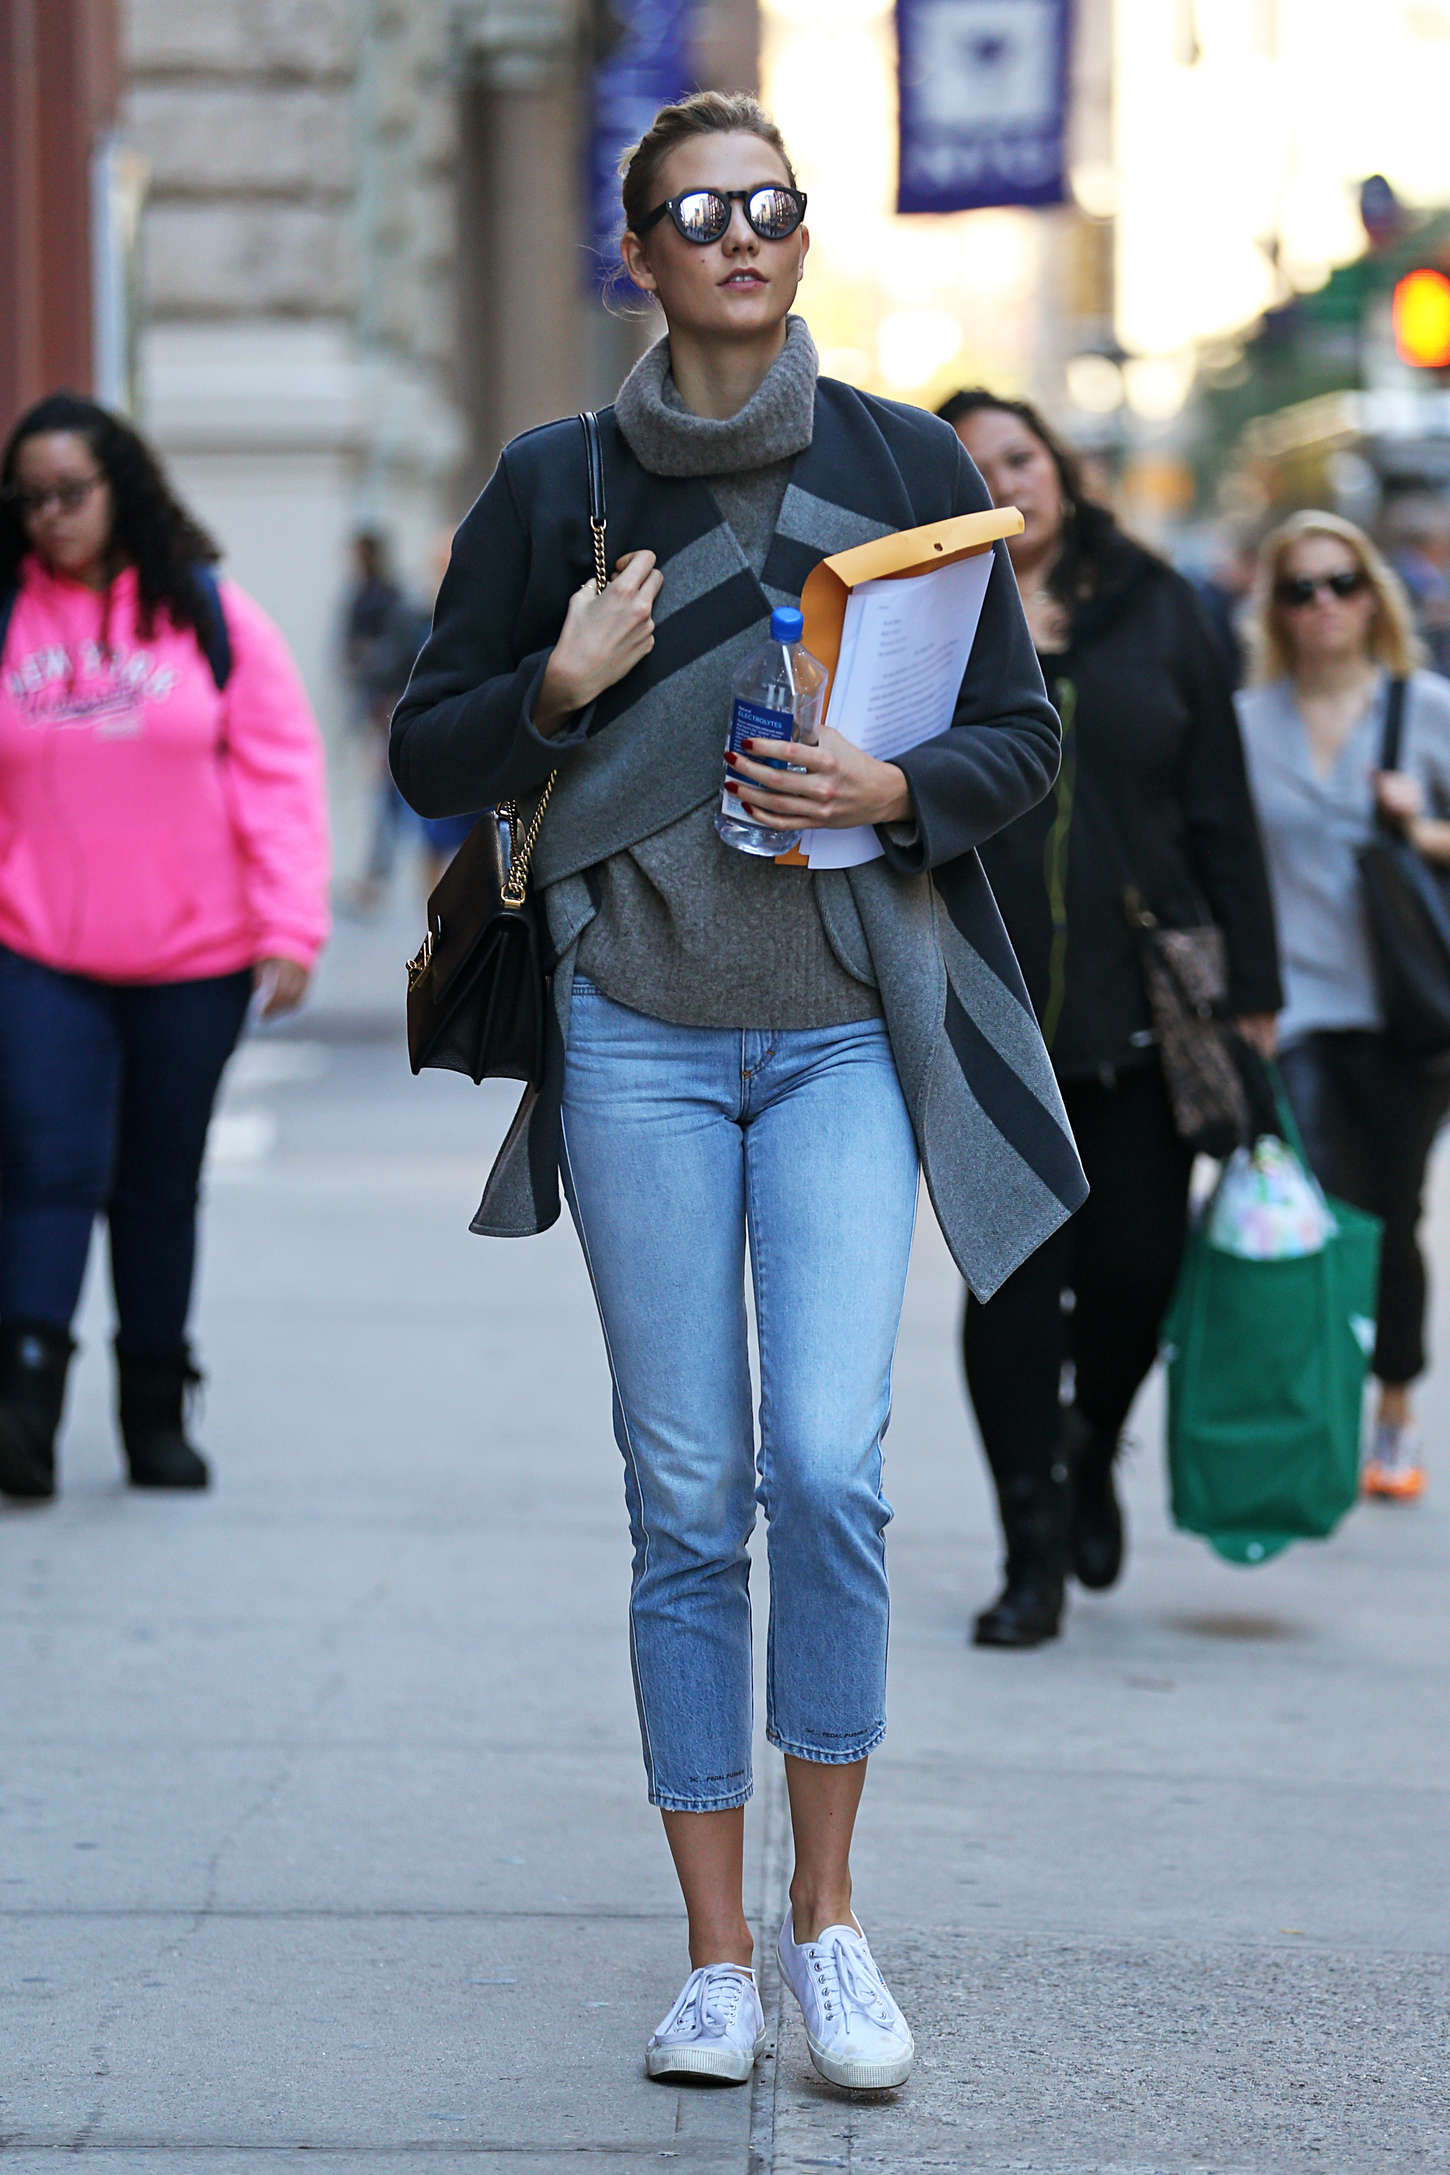 Karlie Kloss in Jeans out in NYC